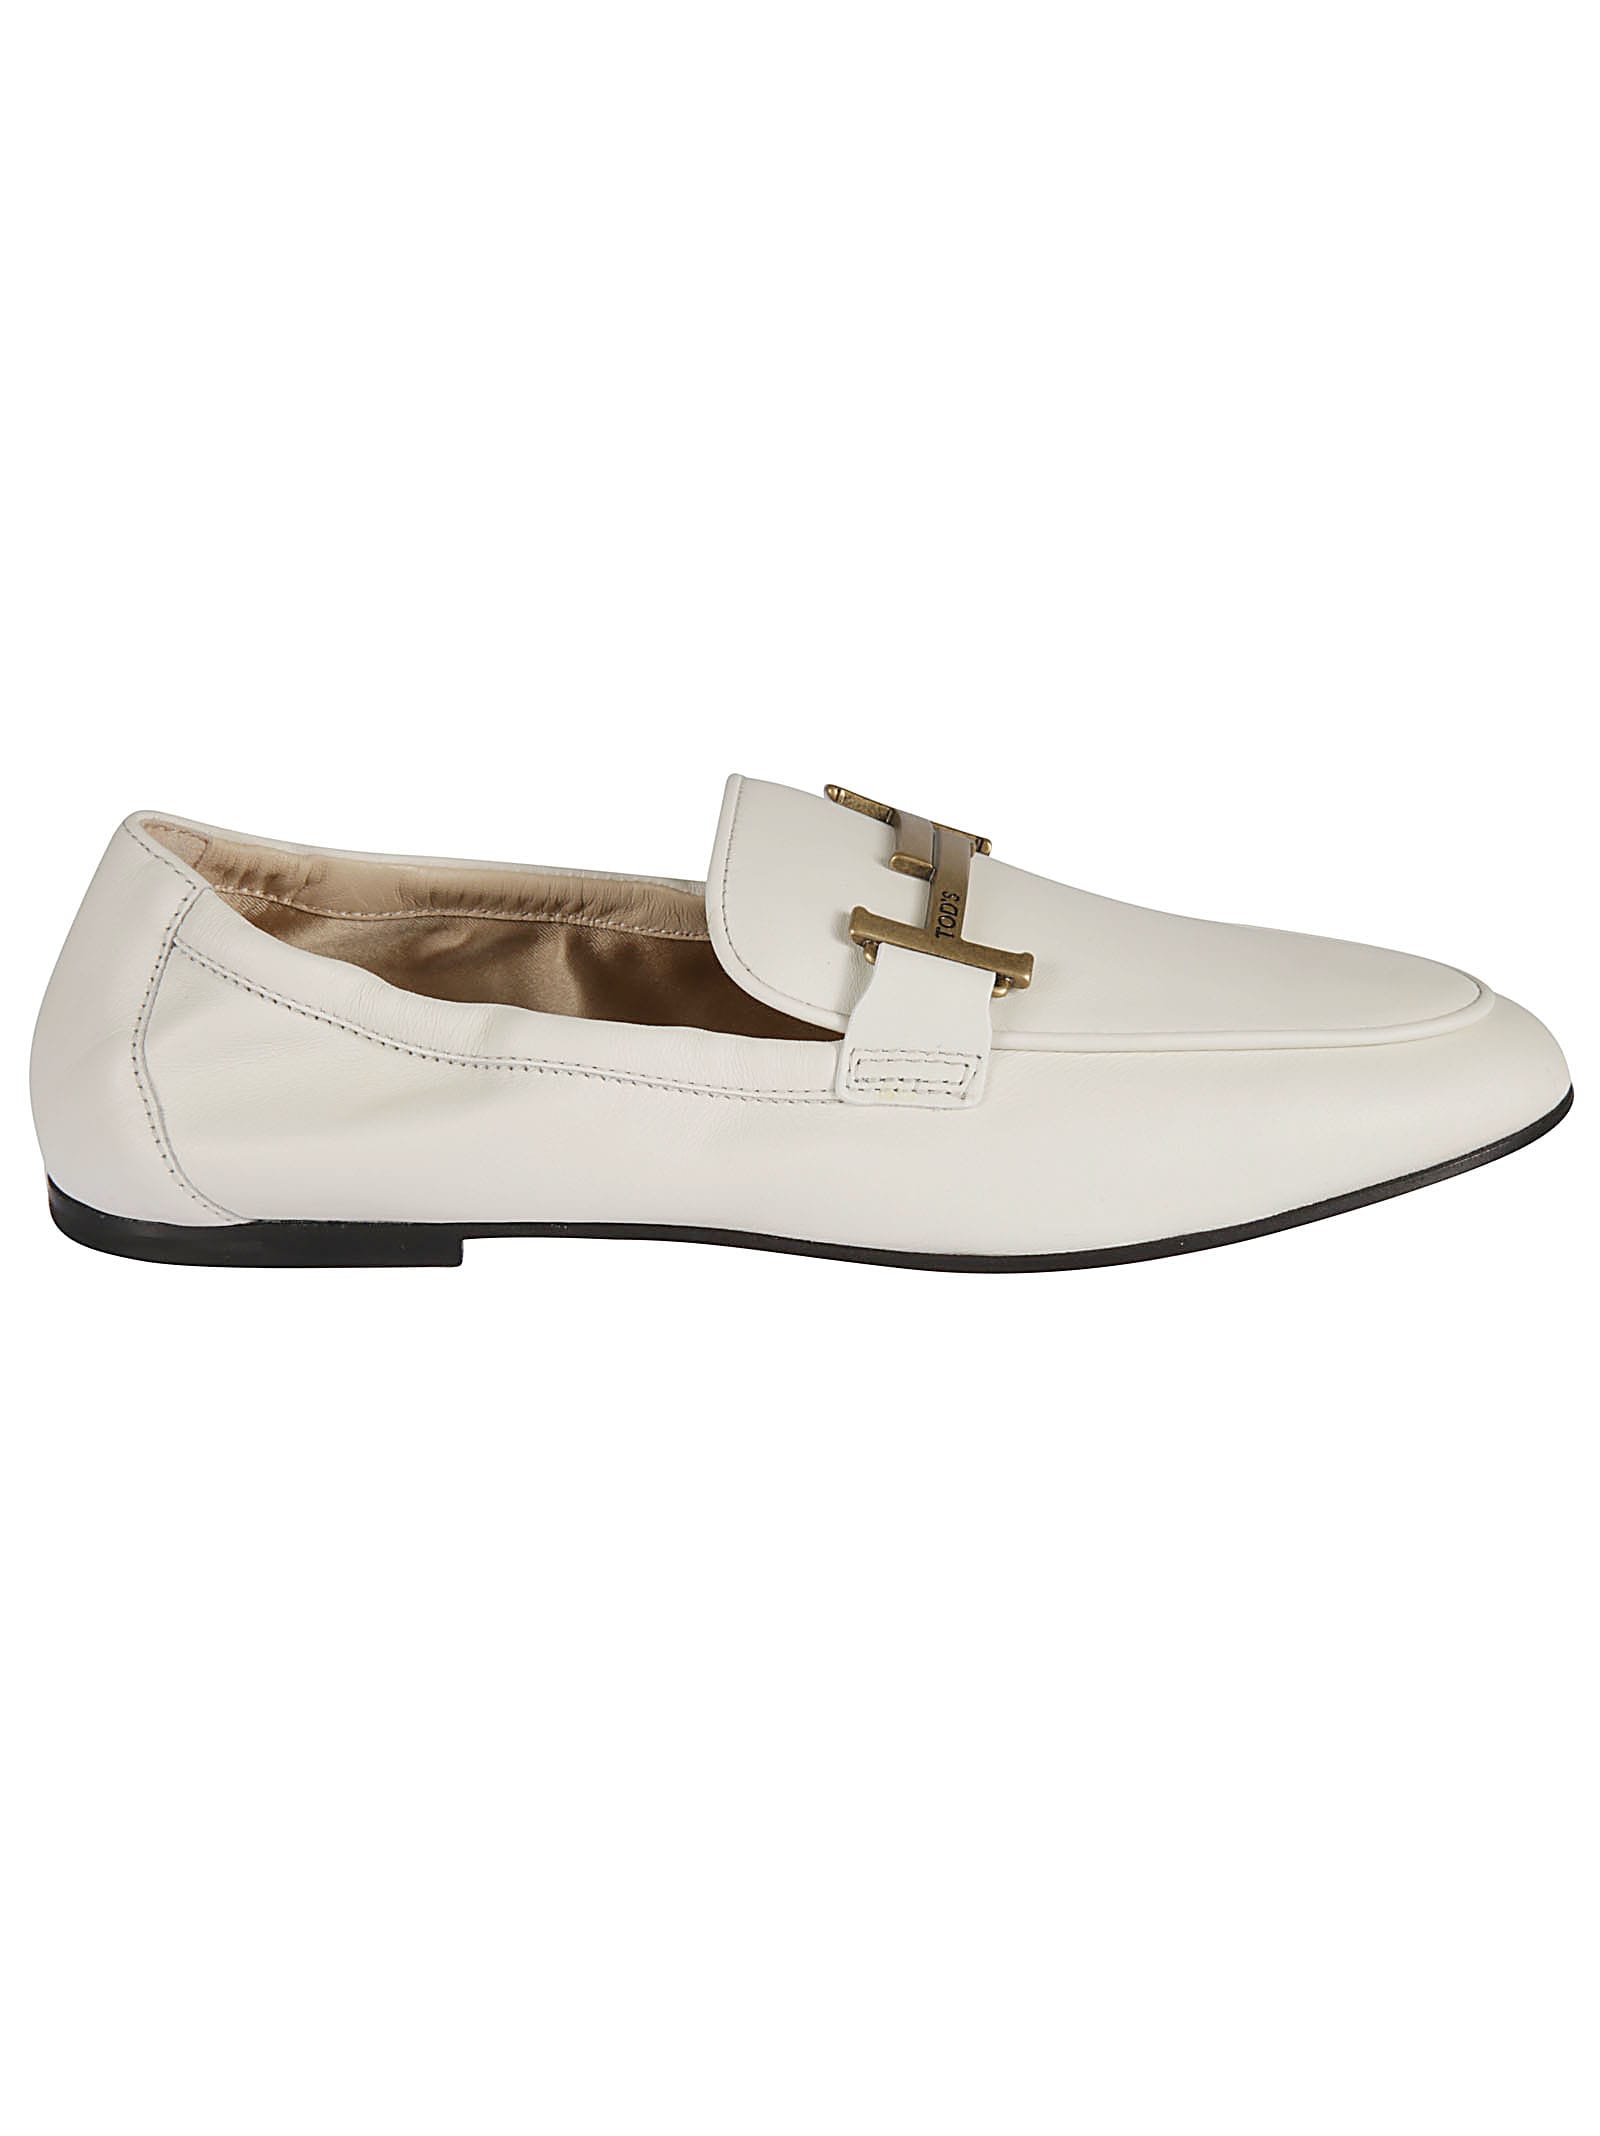 Tods 79a Loafers